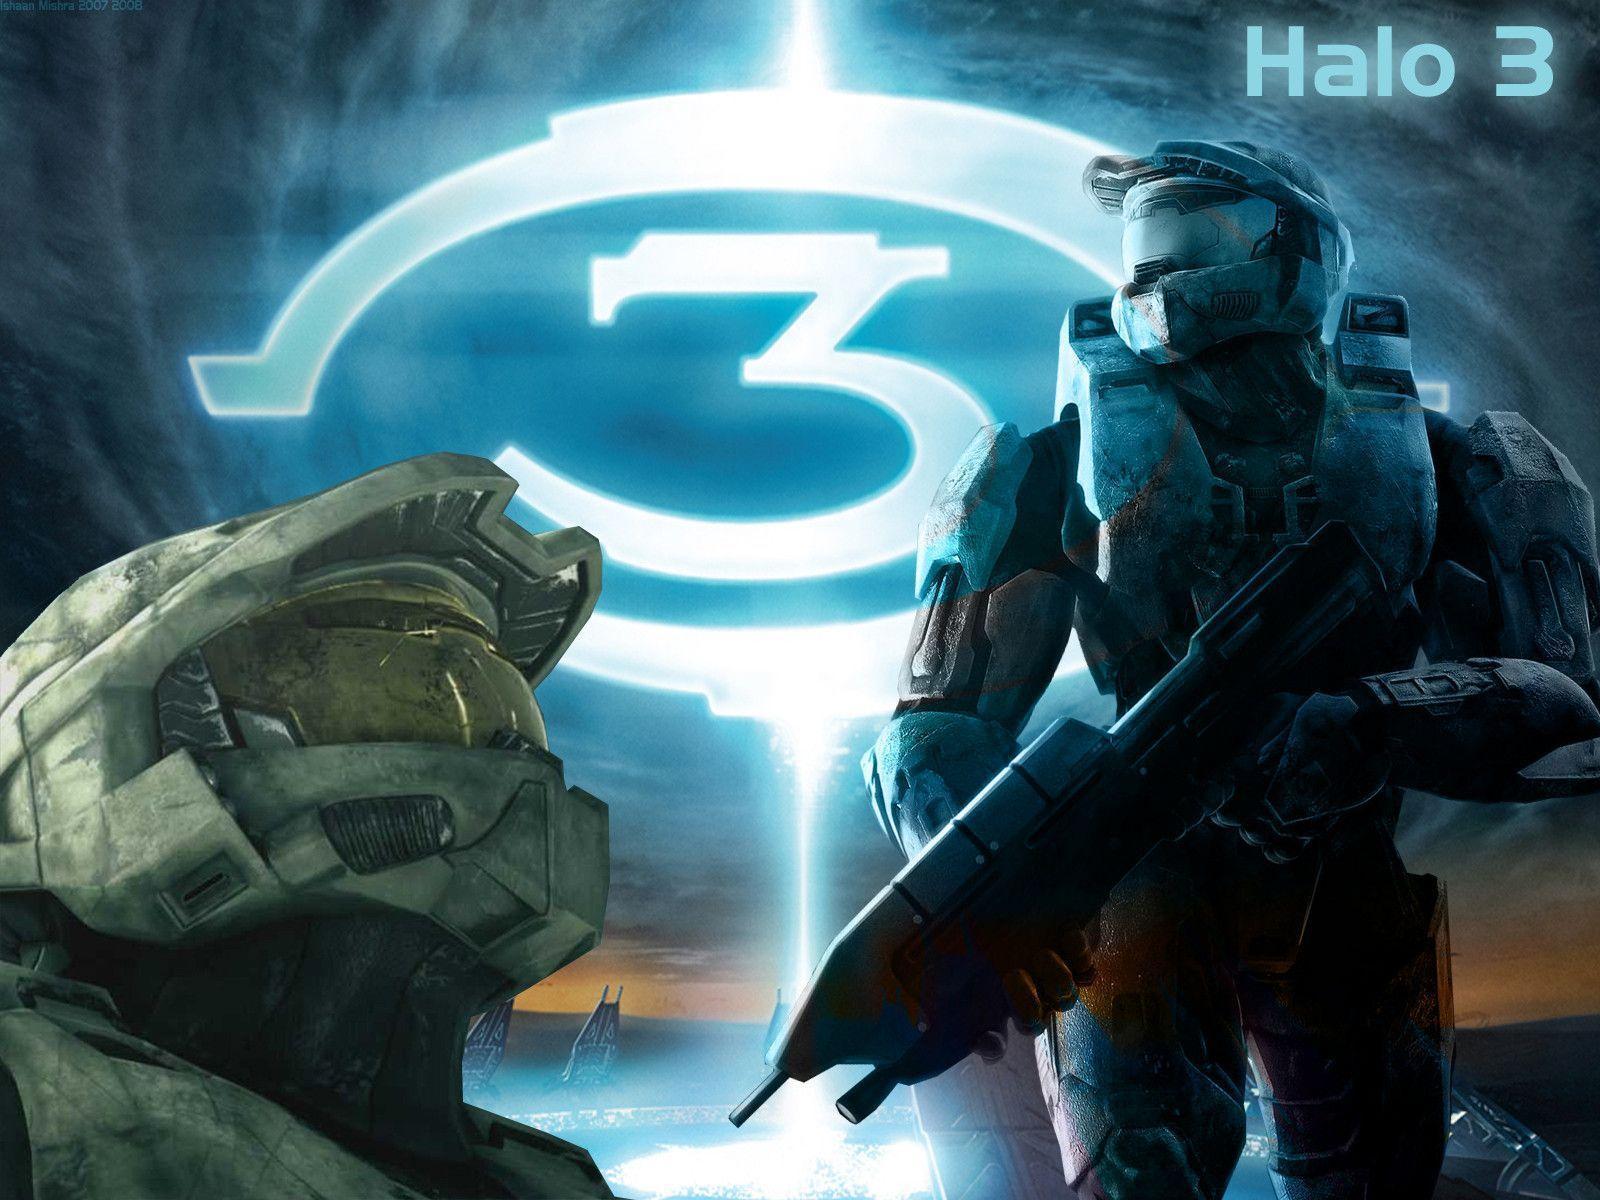 Halo 3 Wallpapers Image & Pictures